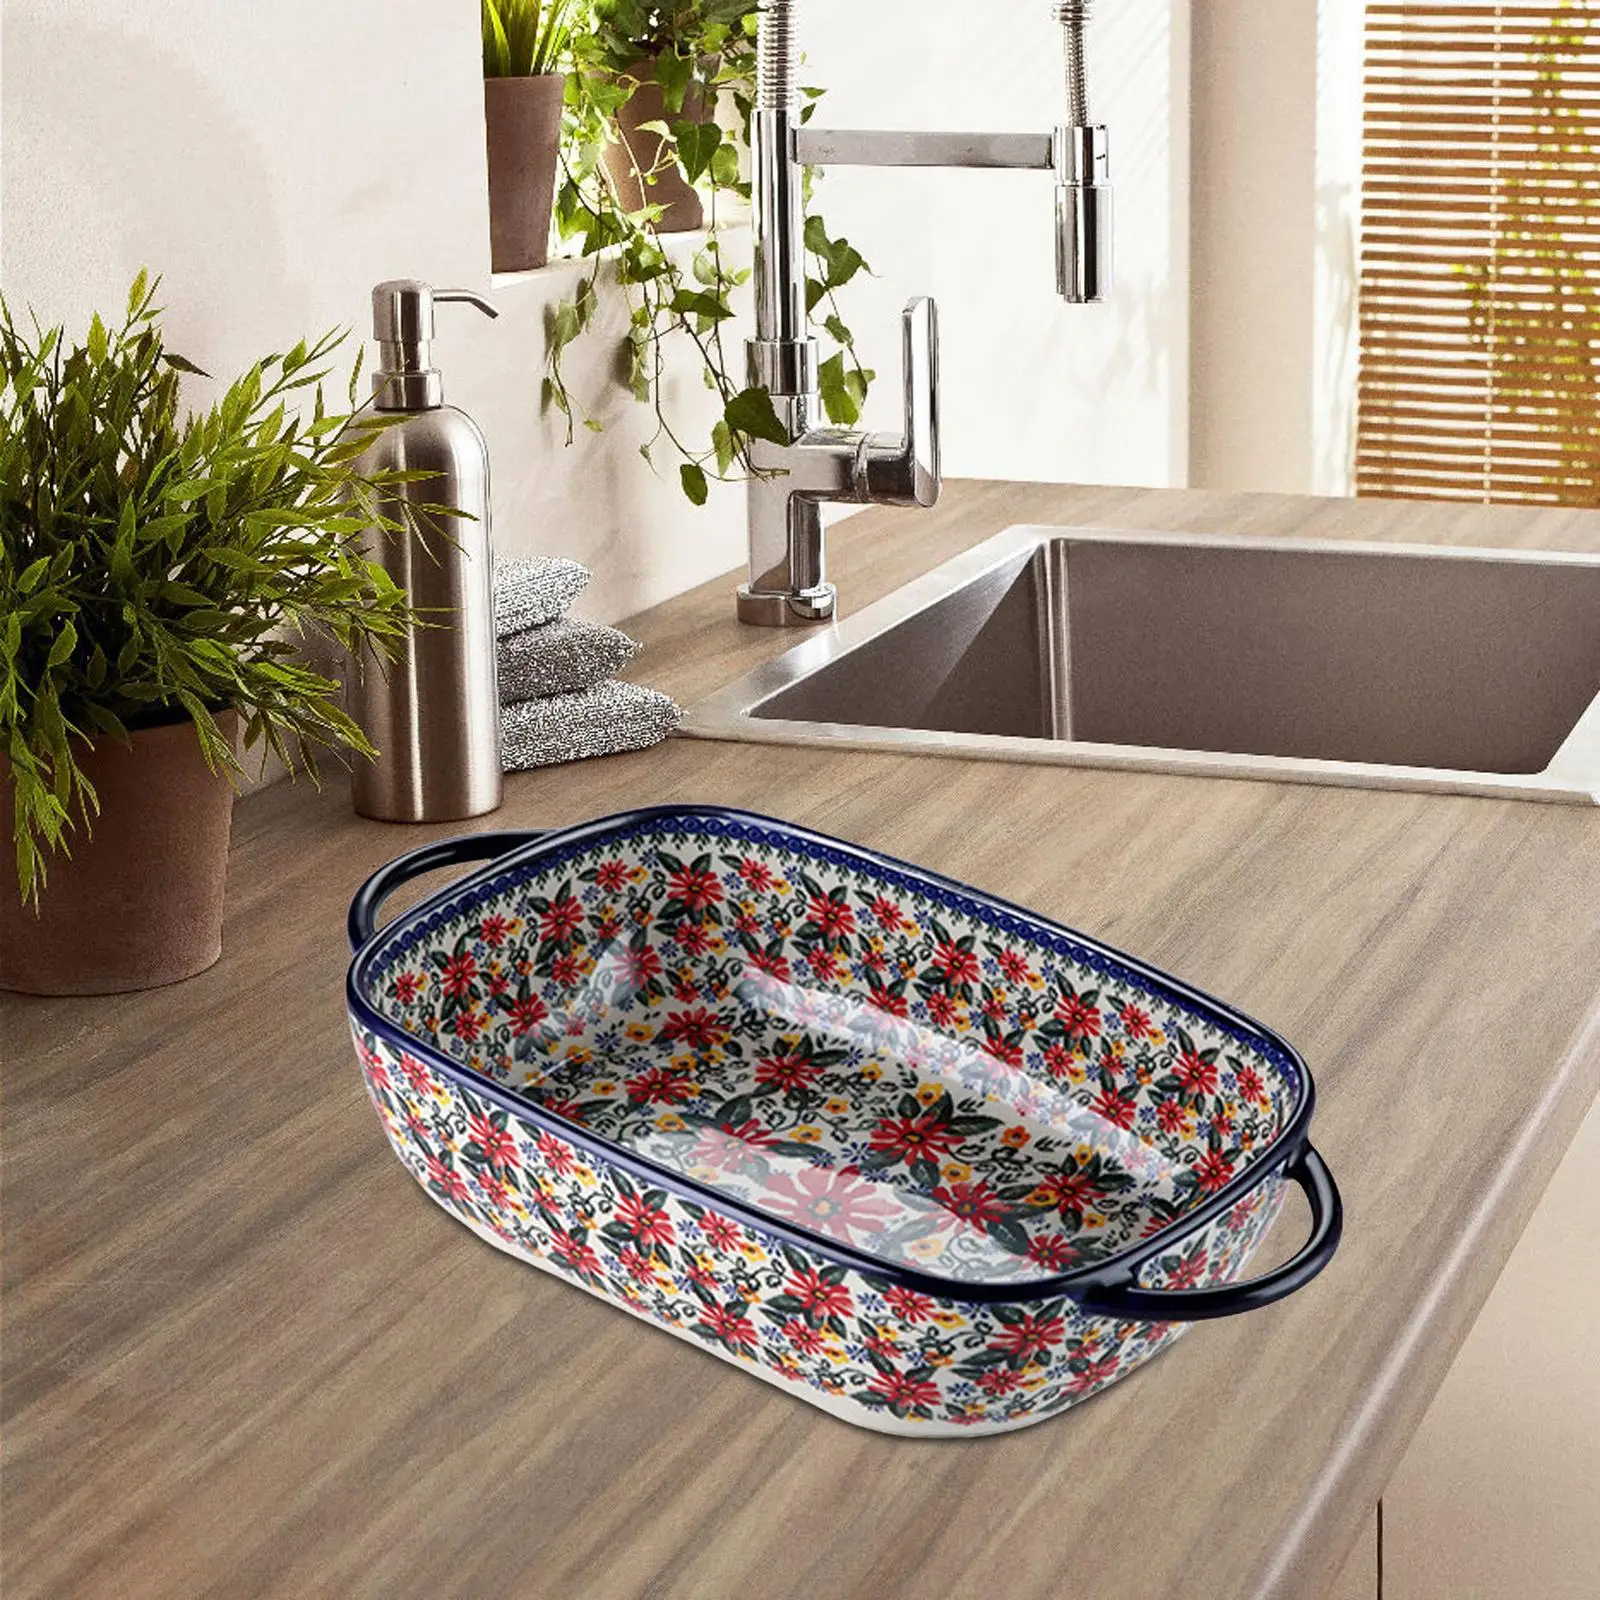 Boho Ceramic Baking Tray Tabletop with Handle Food Serving Plate for Kitchen Salad Soup